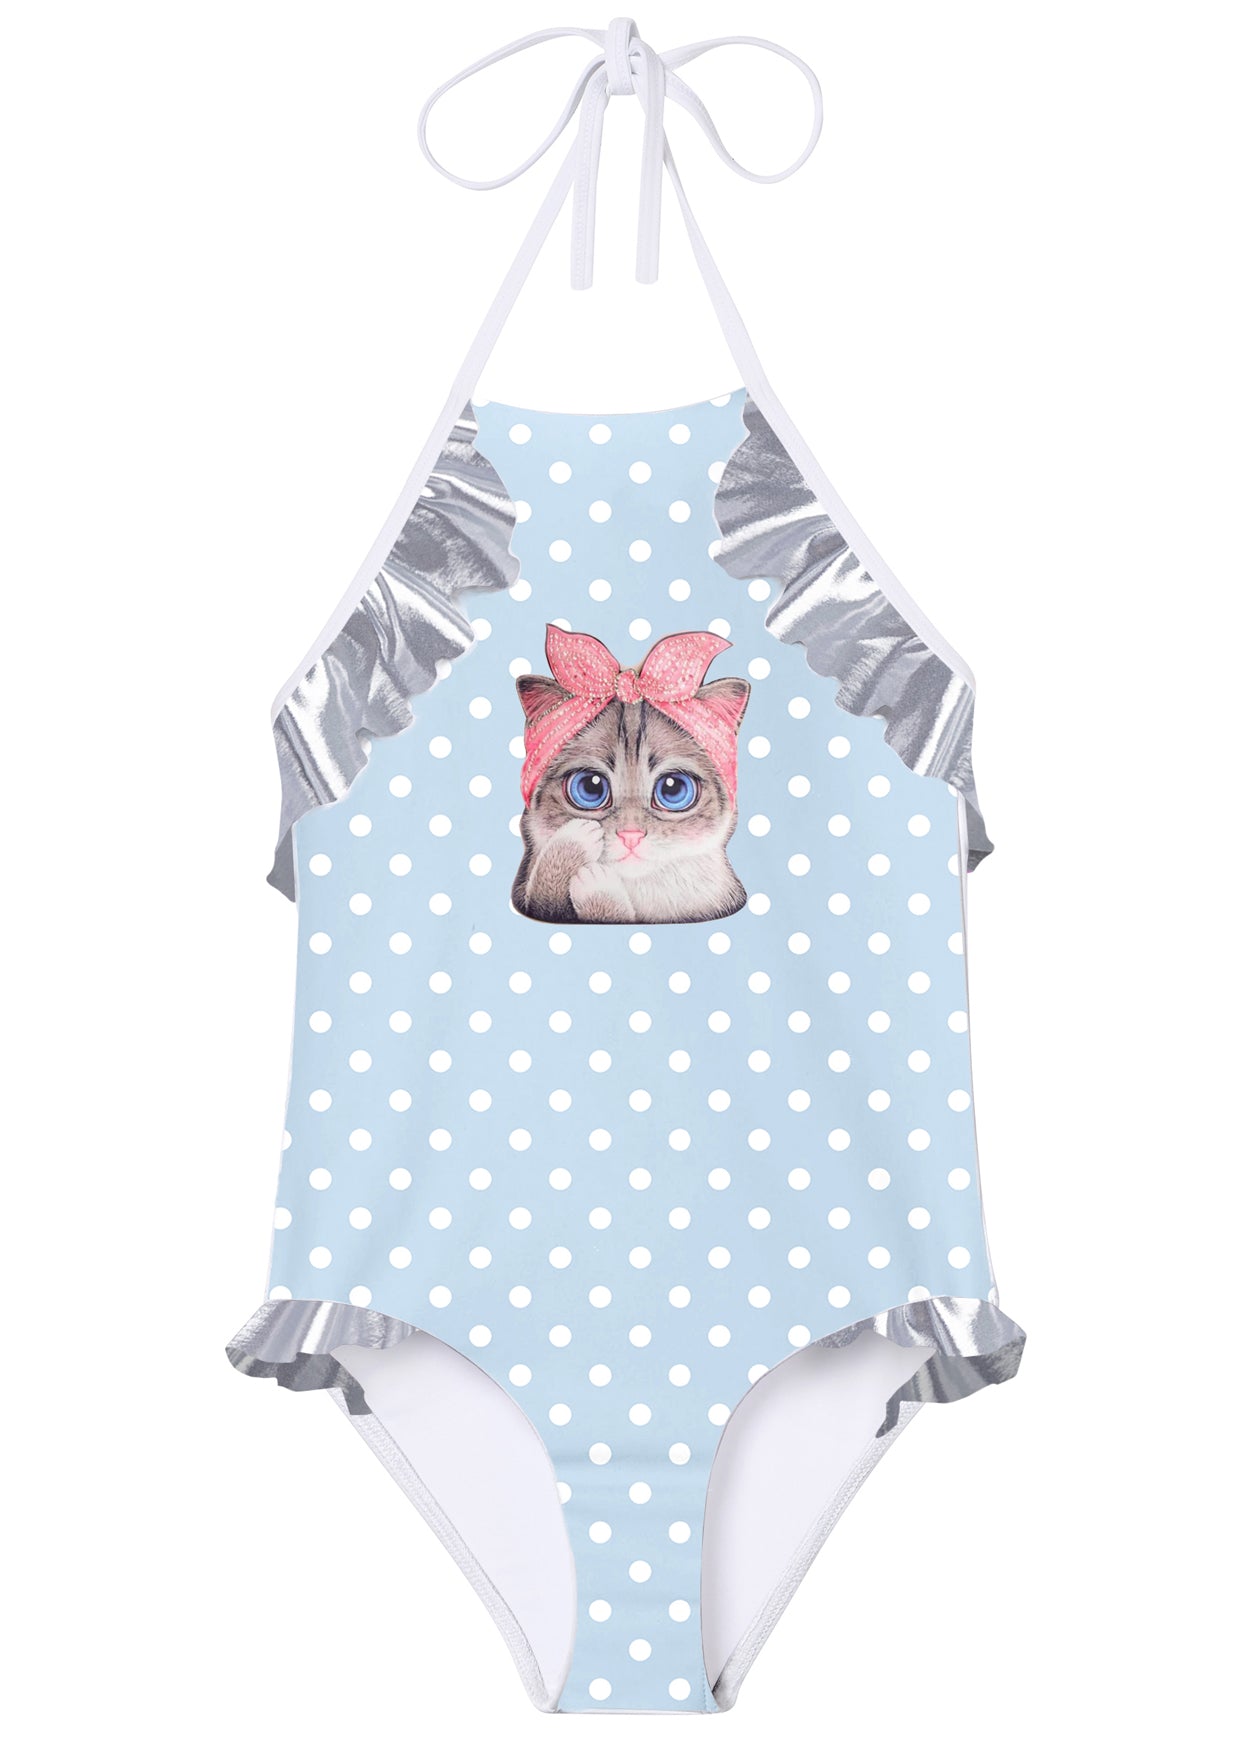 Polka Dot Halter Swimsuit With Silver Ruffle & Cat